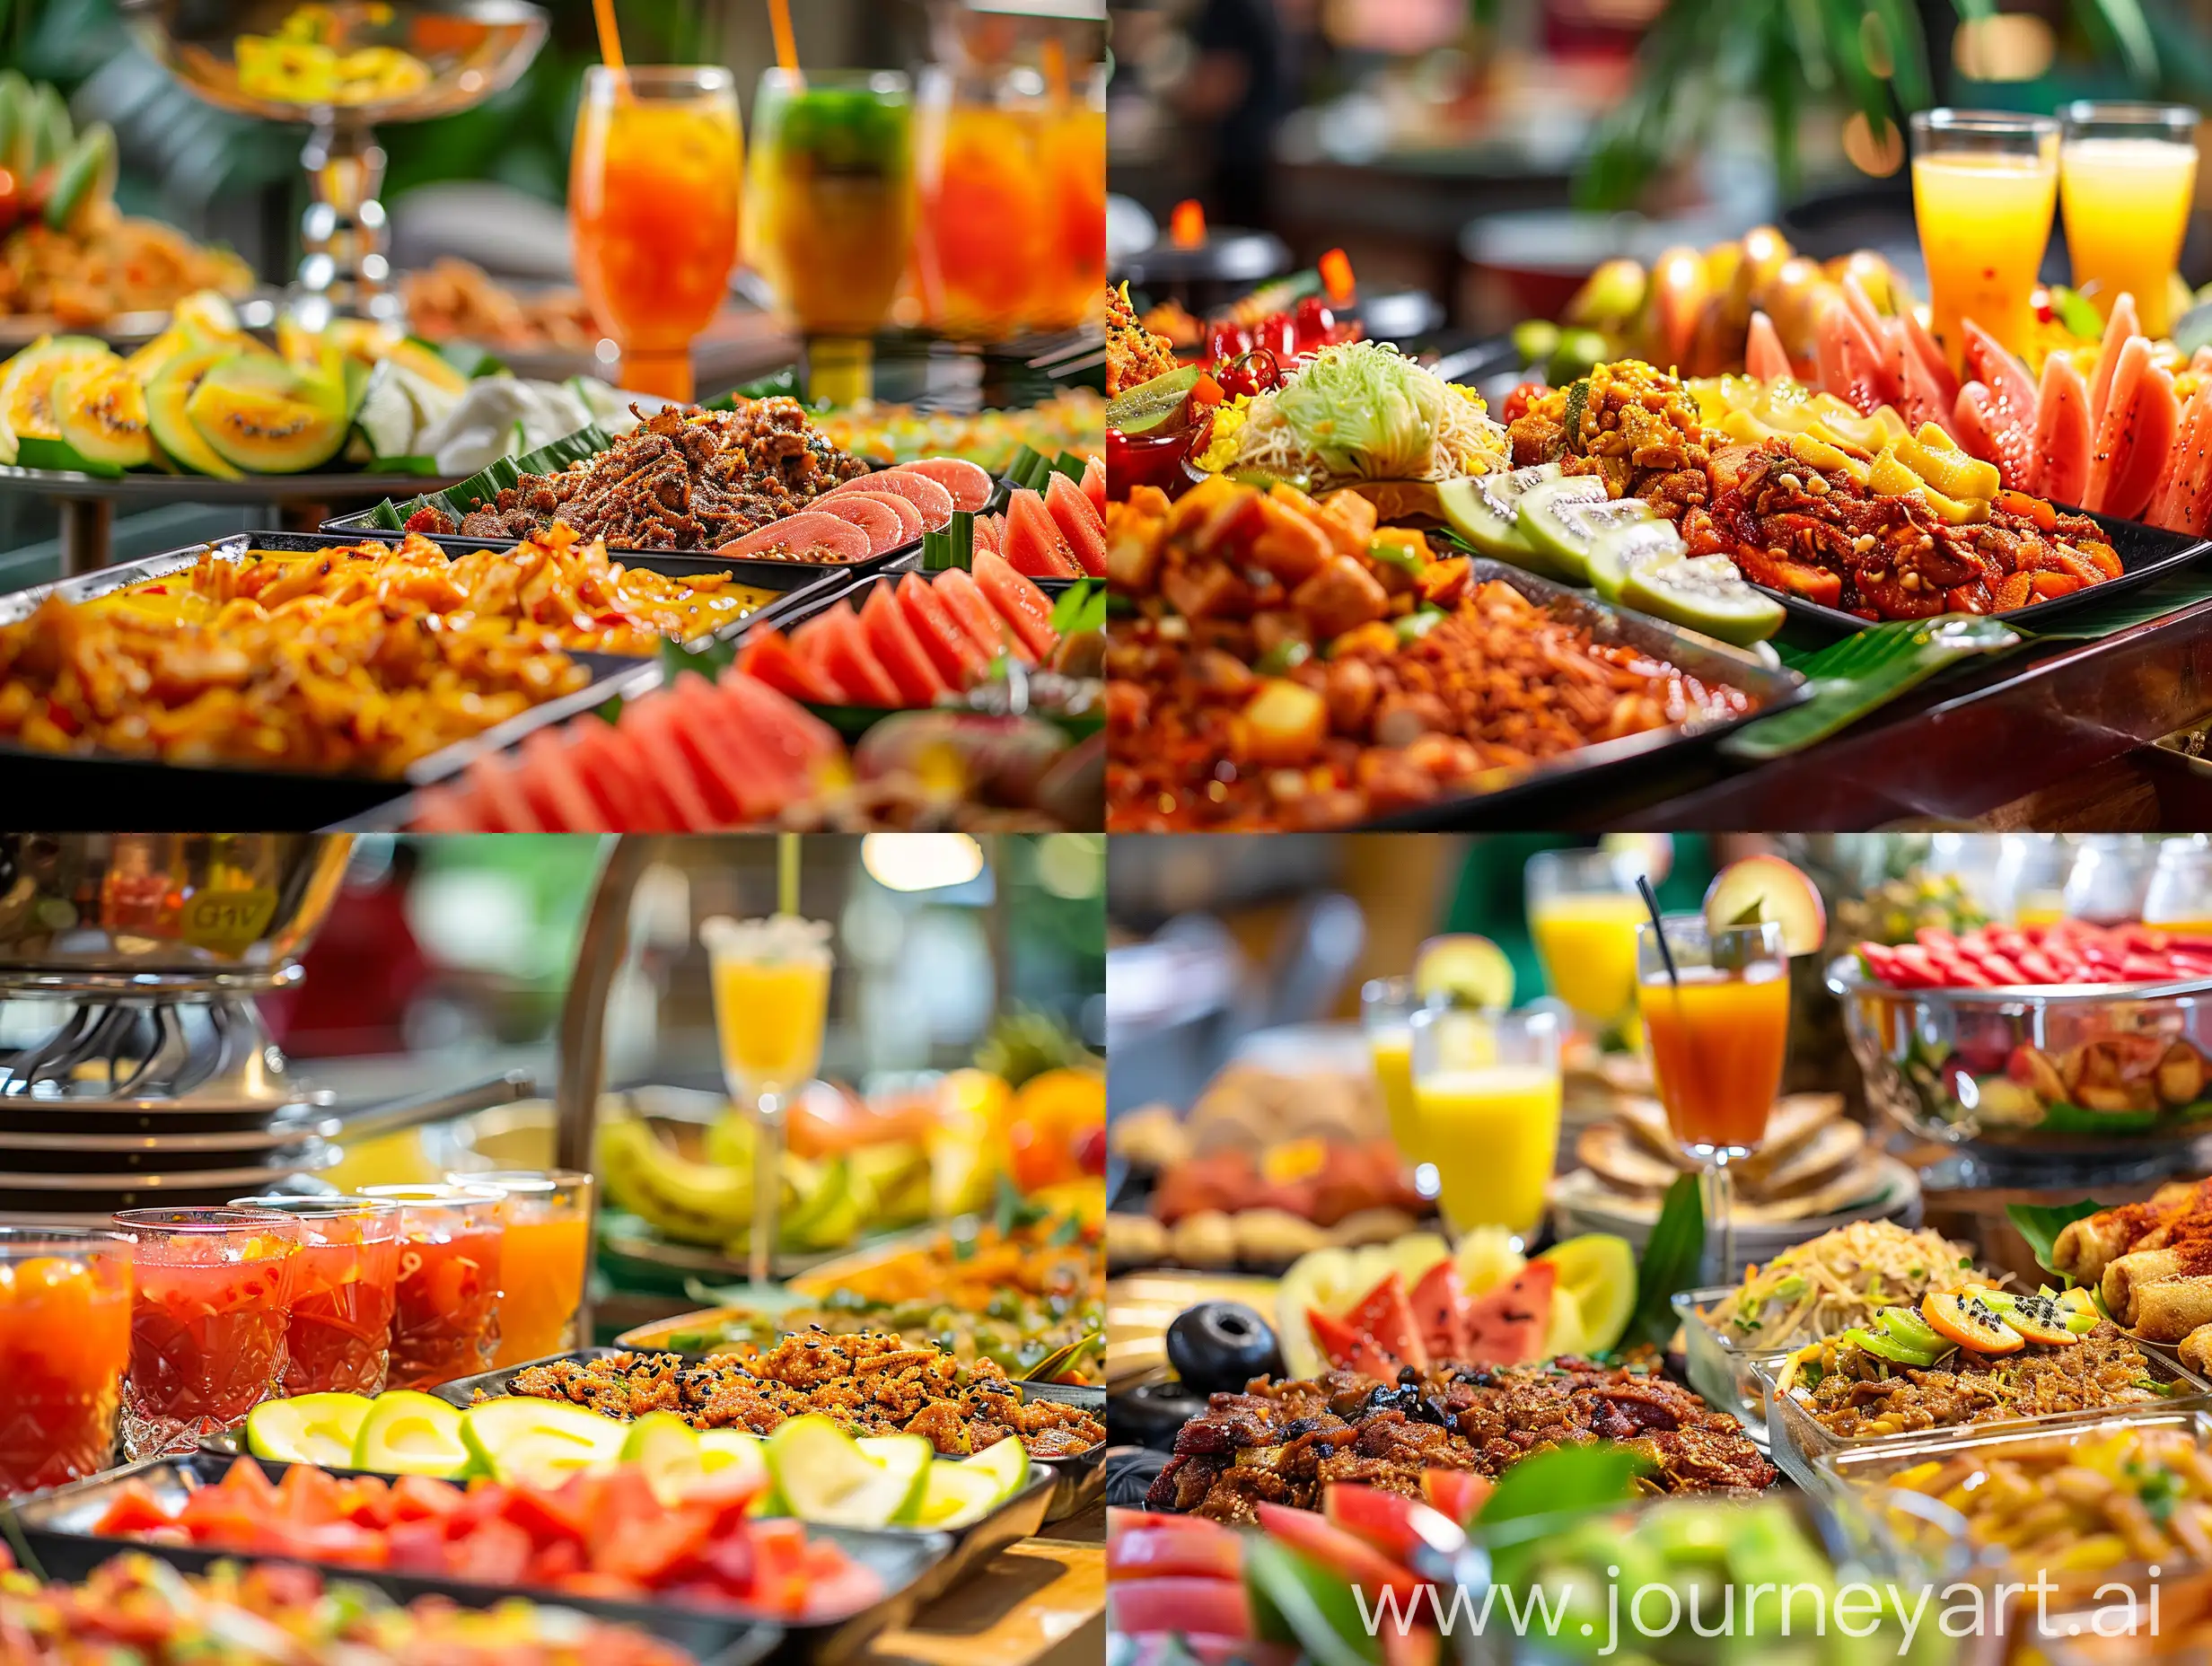 Craft a visually striking image showcasing a close-up view of a catering buffet spread with a variety of Indonesian foods, Fruitsa slices, and juice drink on glasses. Employ blurred background techniques to create depth and emphasize the intricate details of the cooked indonesian food selection, enticing viewers with its vibrant colors and delicious offerings. This wide-angle photograph captures the essence of a lively dining experience indoors